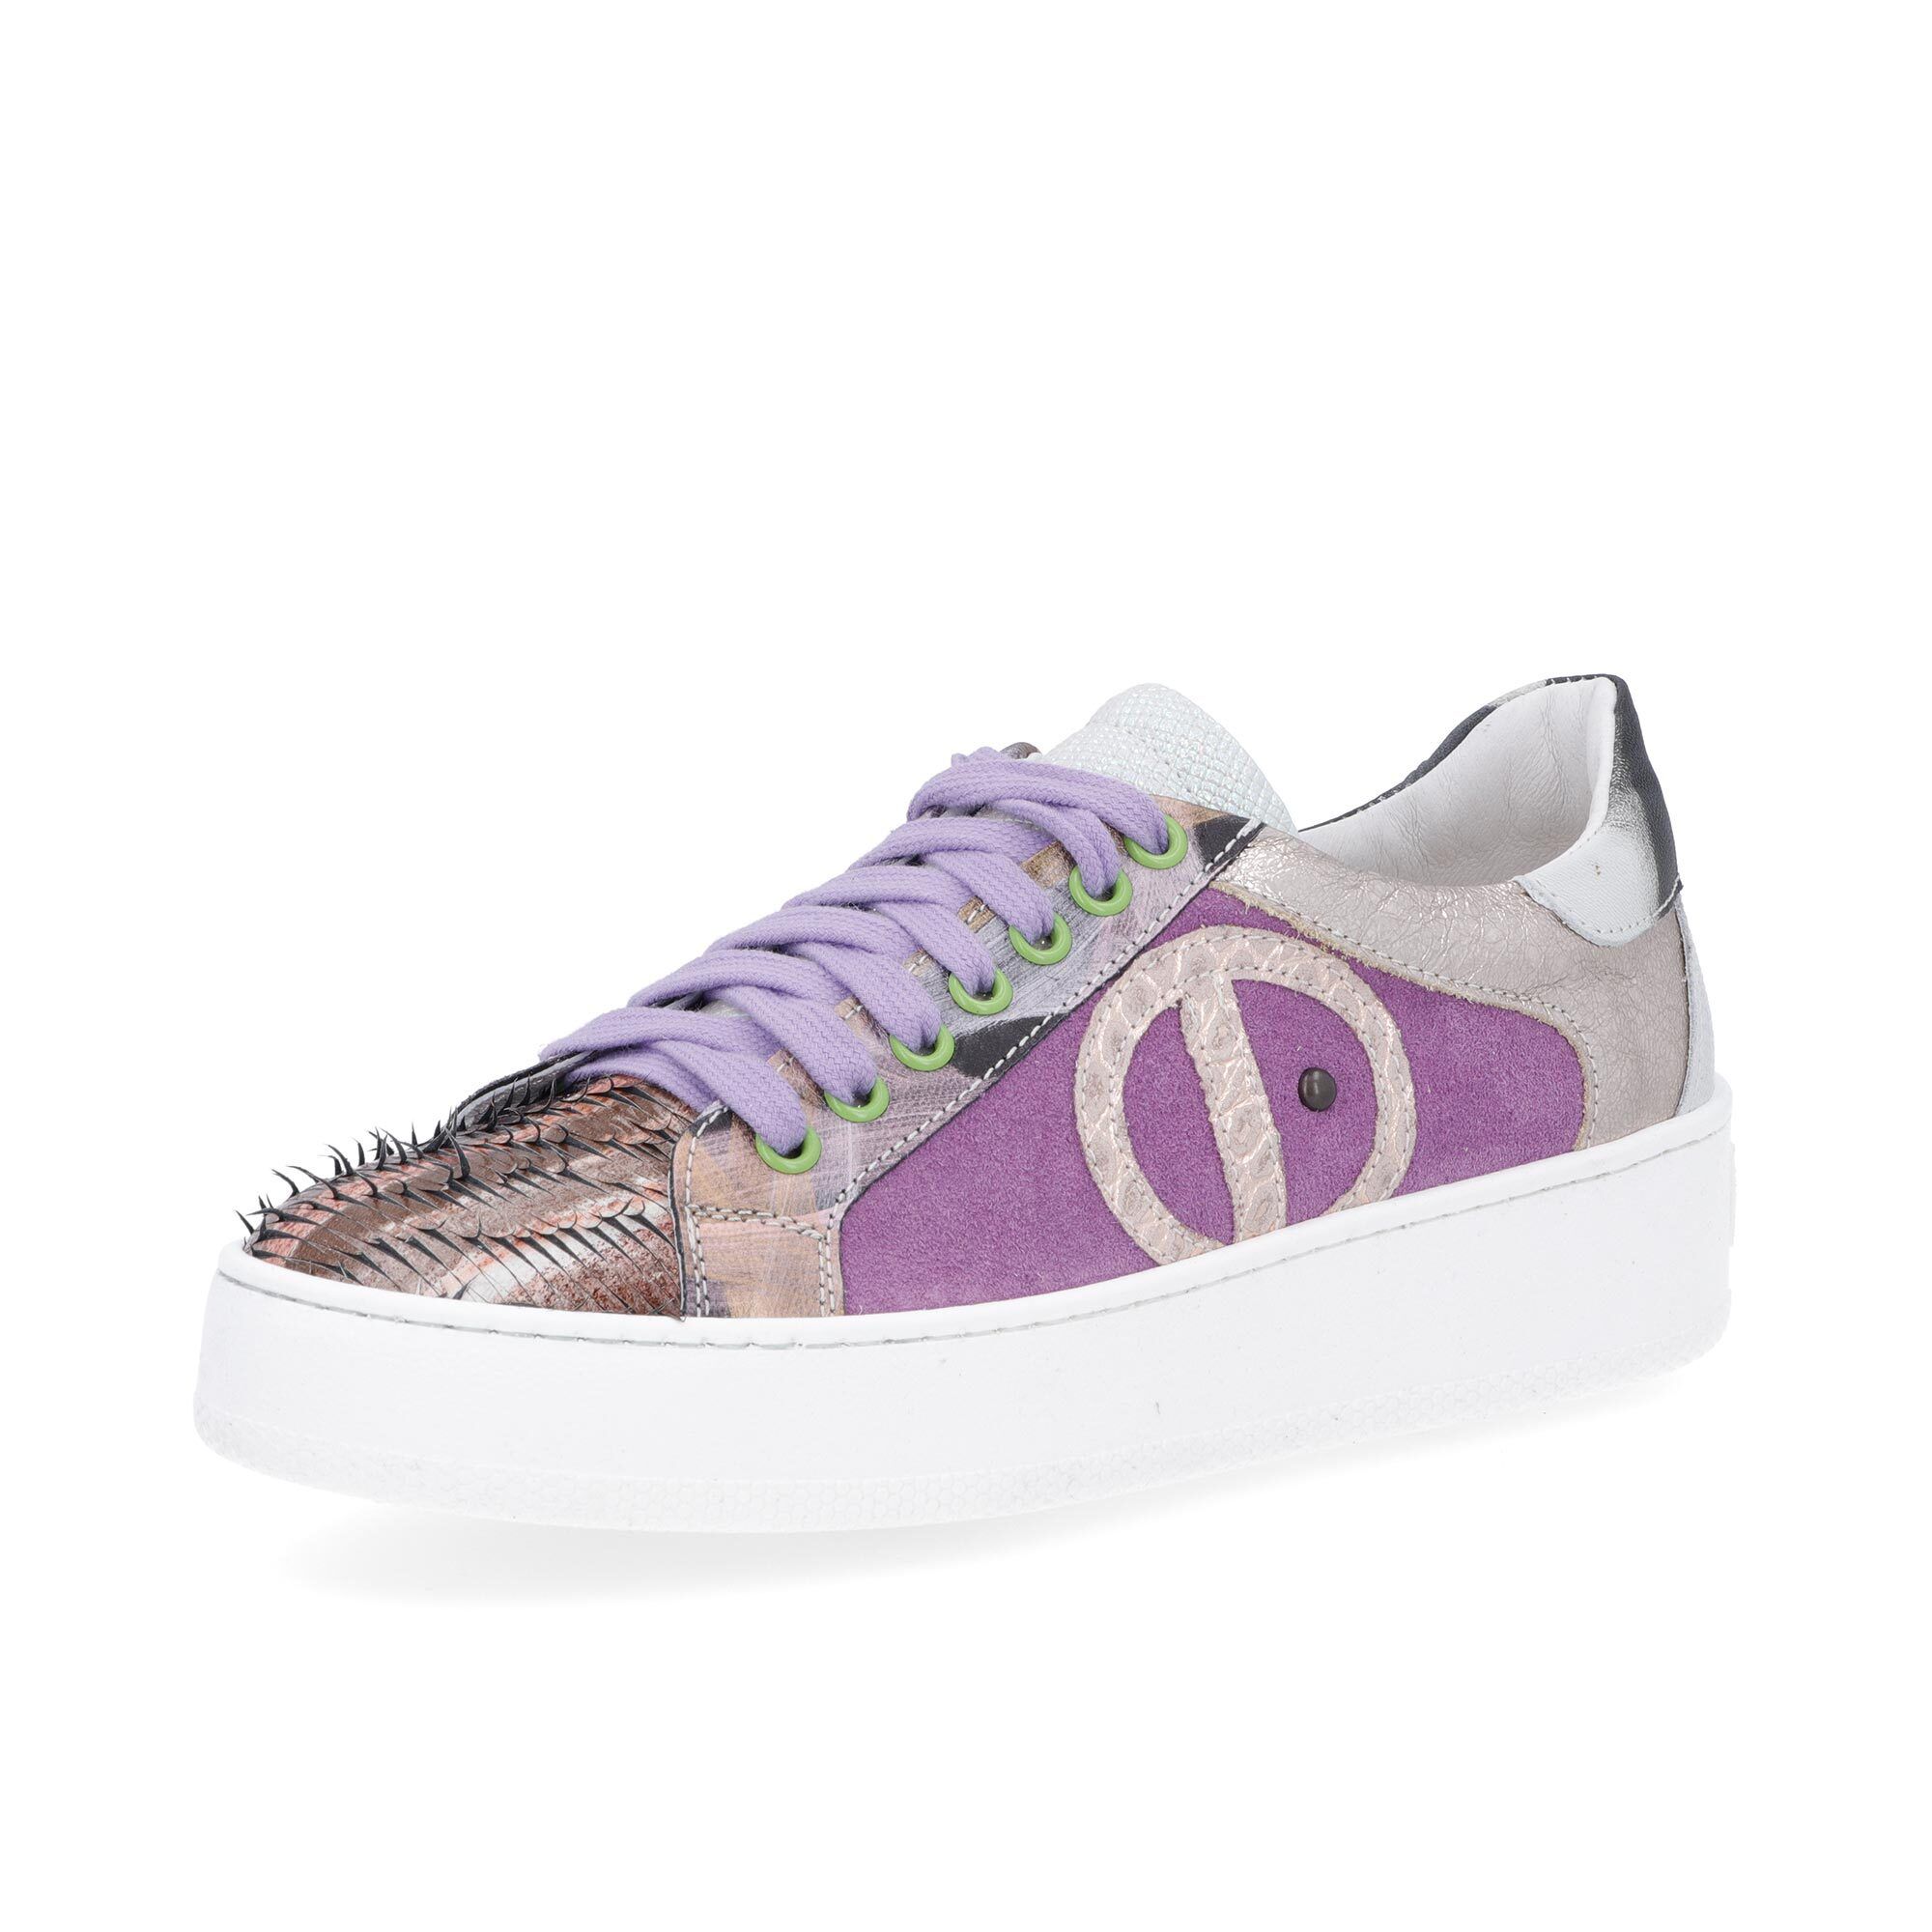 Image of Sneaker stringate in pelle patchwork con logo